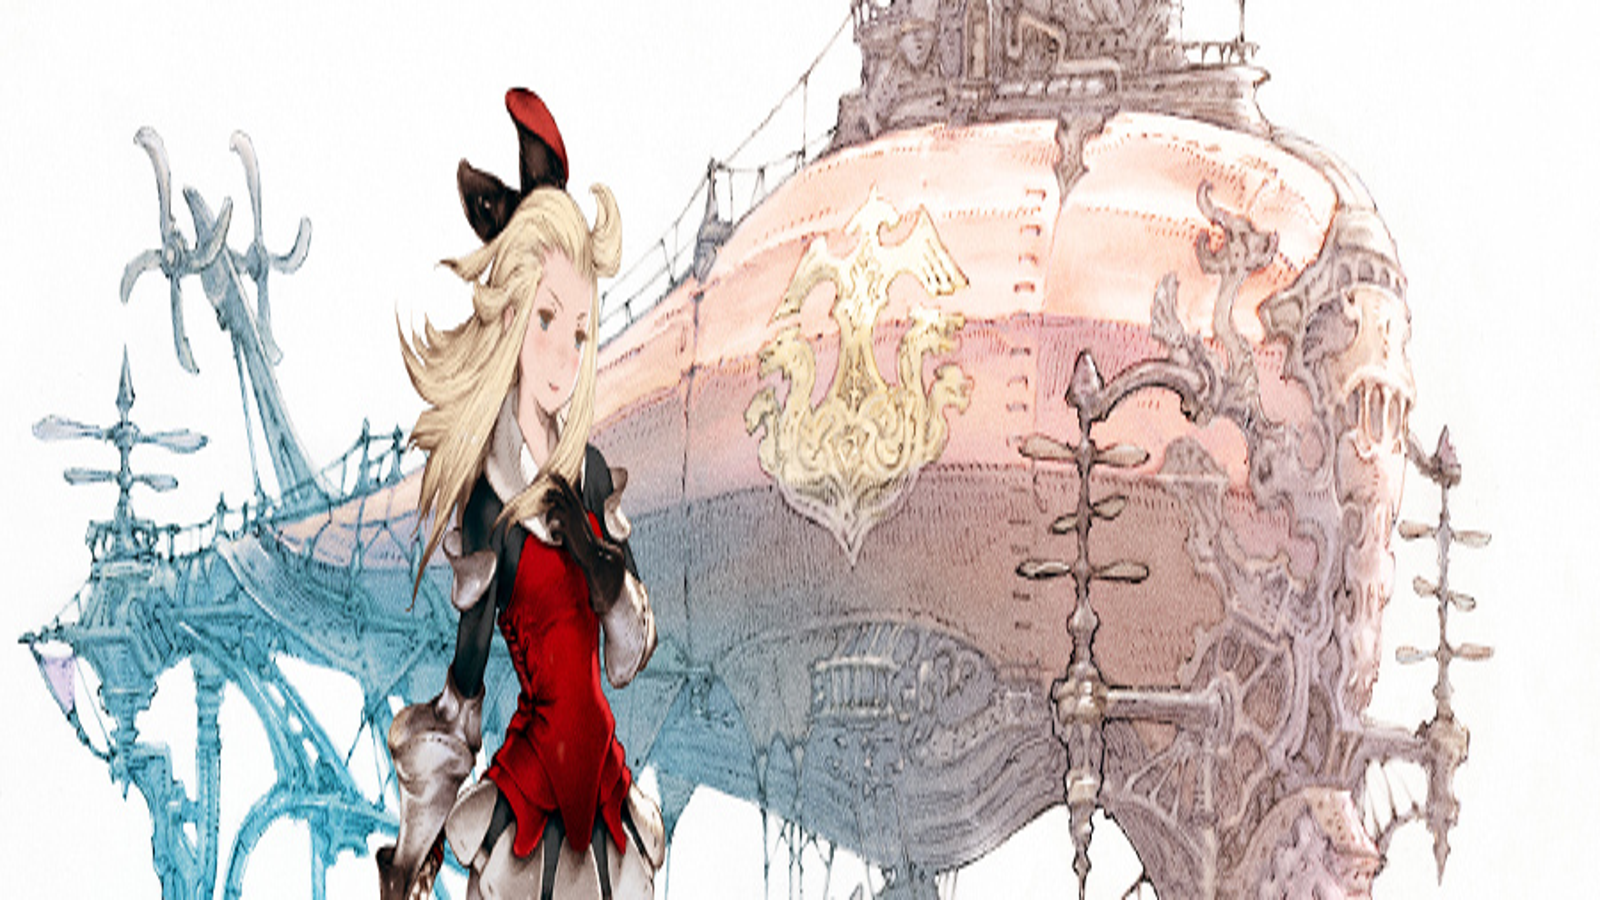 Bravely Default: For the Sequel getting an overseas edition